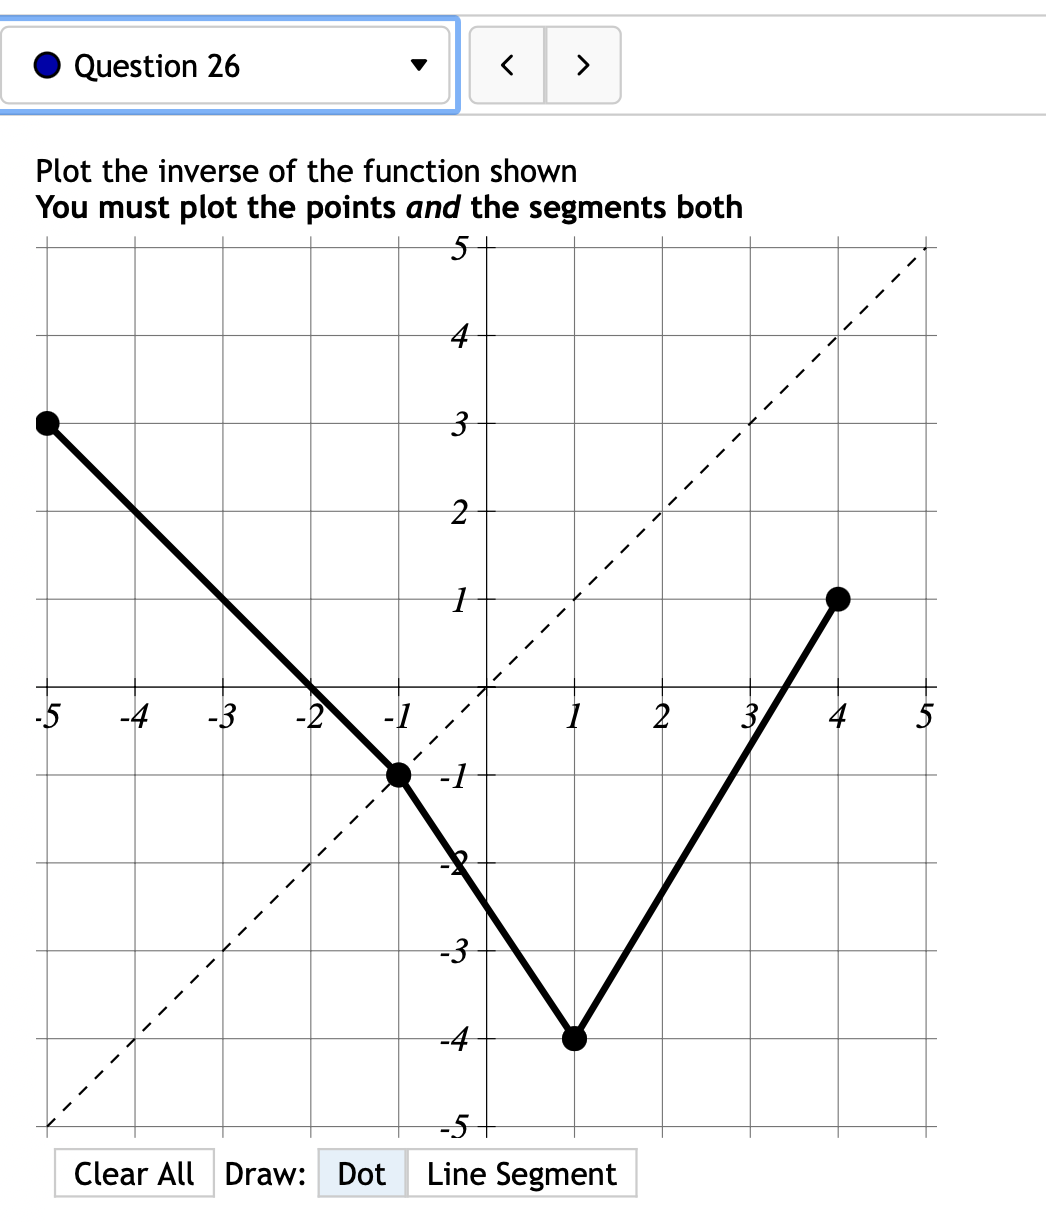 Question 26
Plot the inverse of the function shown
You must plot the points and the segments both
5
4
-5
-4
-3
-2
2
5
-3
-4
-5+
Clear All Draw: Dot Line Segment
3.
